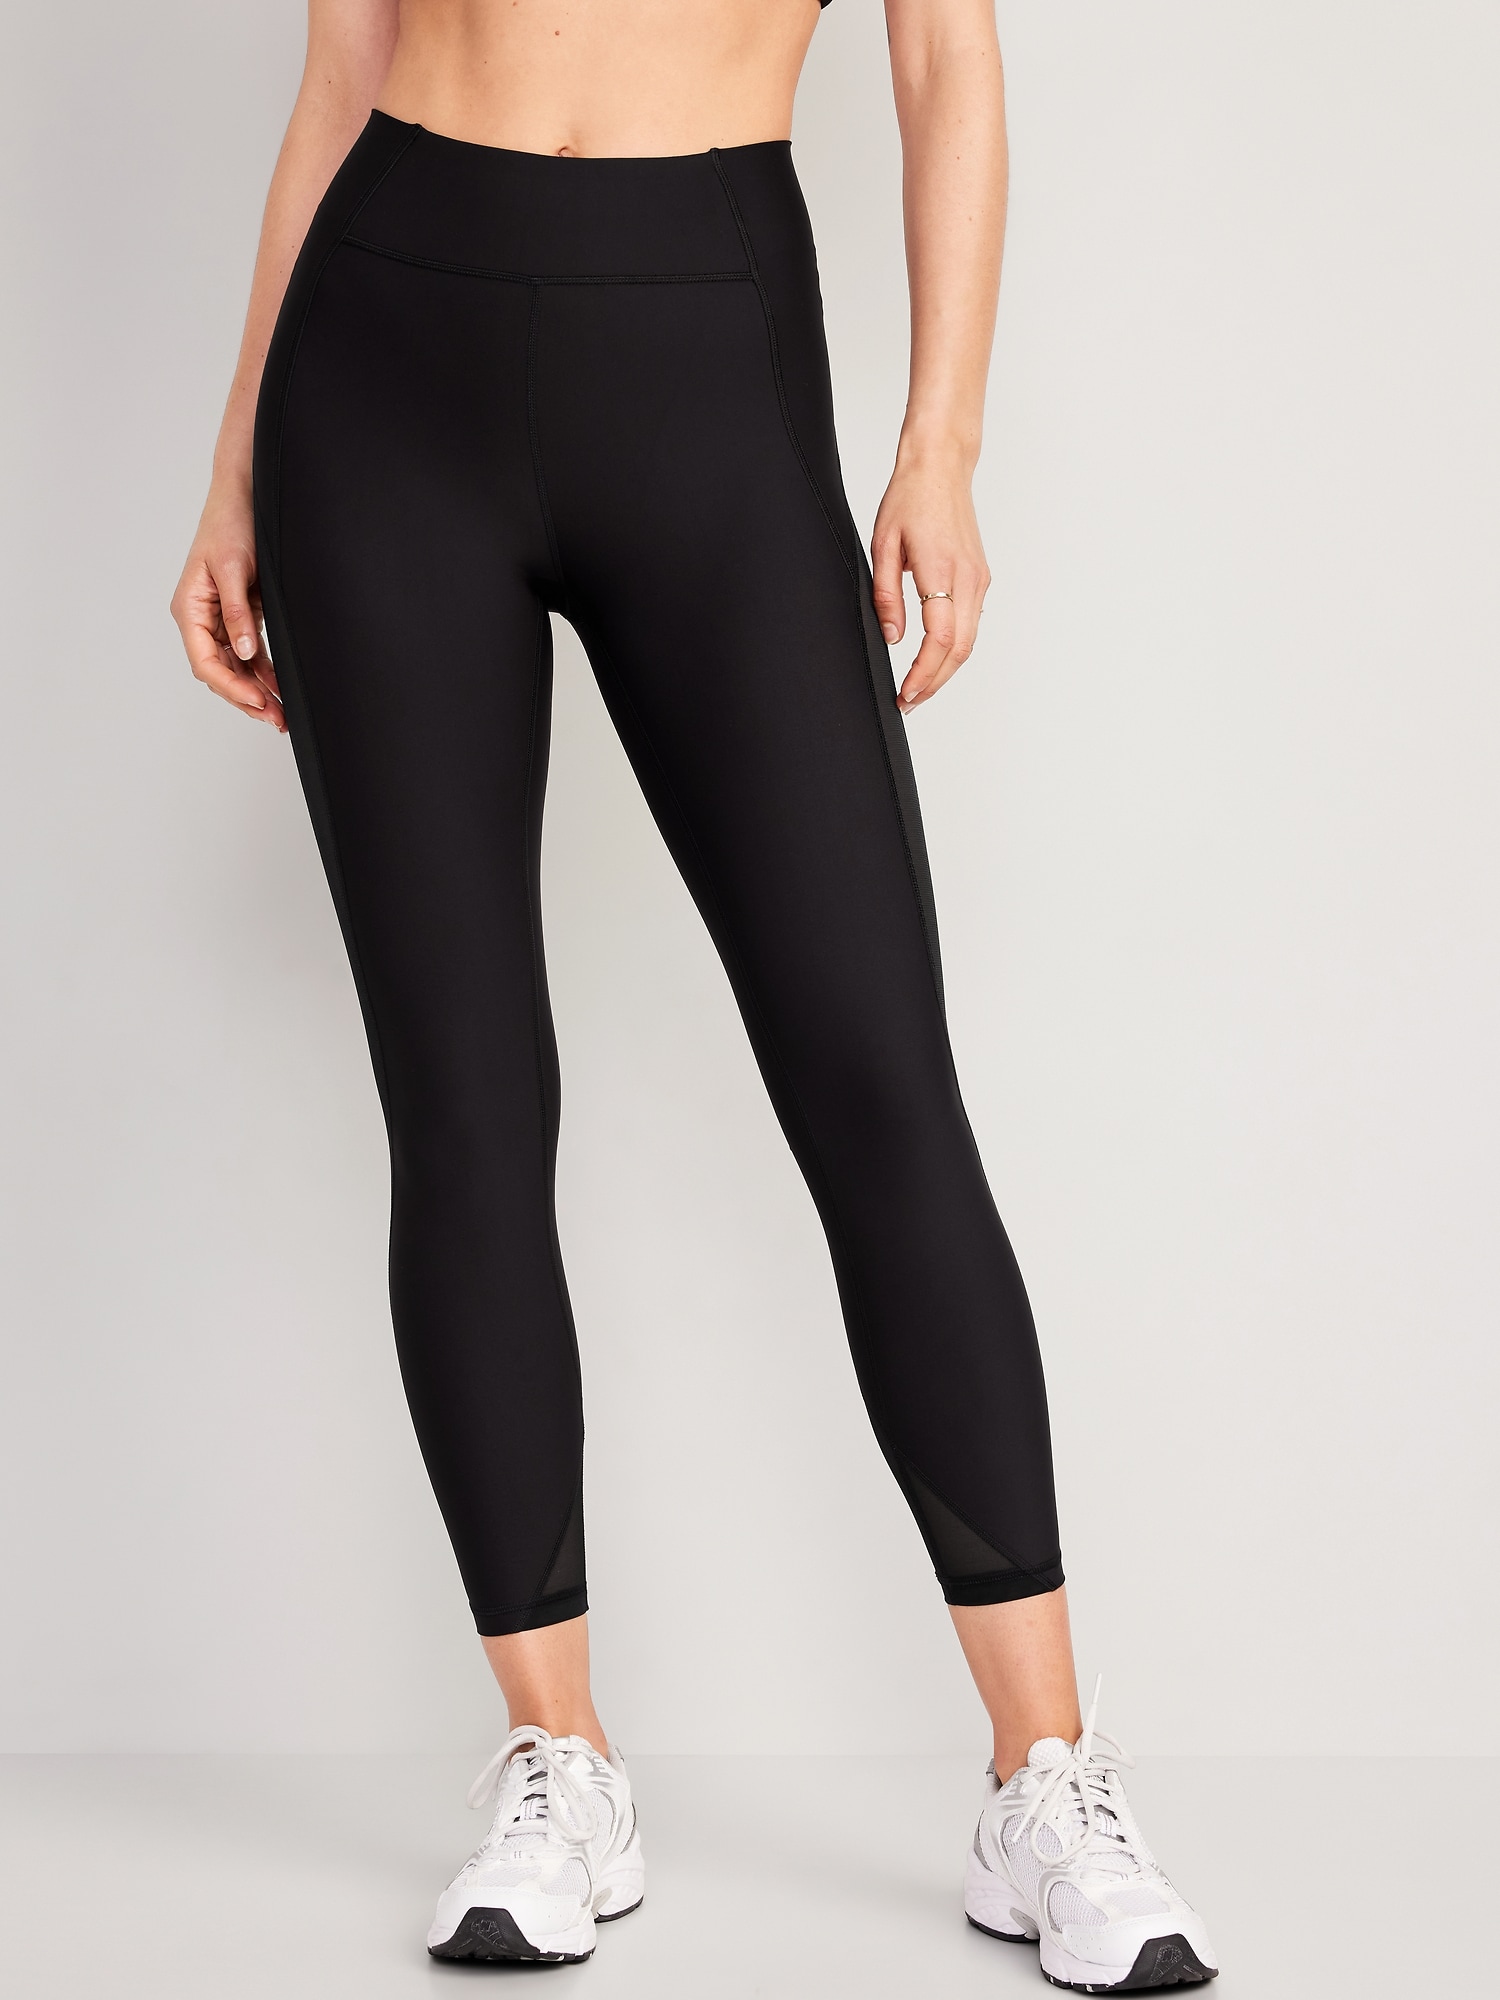 NORMOV High Waist Black Compression High Waisted Black Leggings For Women  Warm, Thick, Push Up, Elastic Winter Pants 201203 From Lu01, $14.77